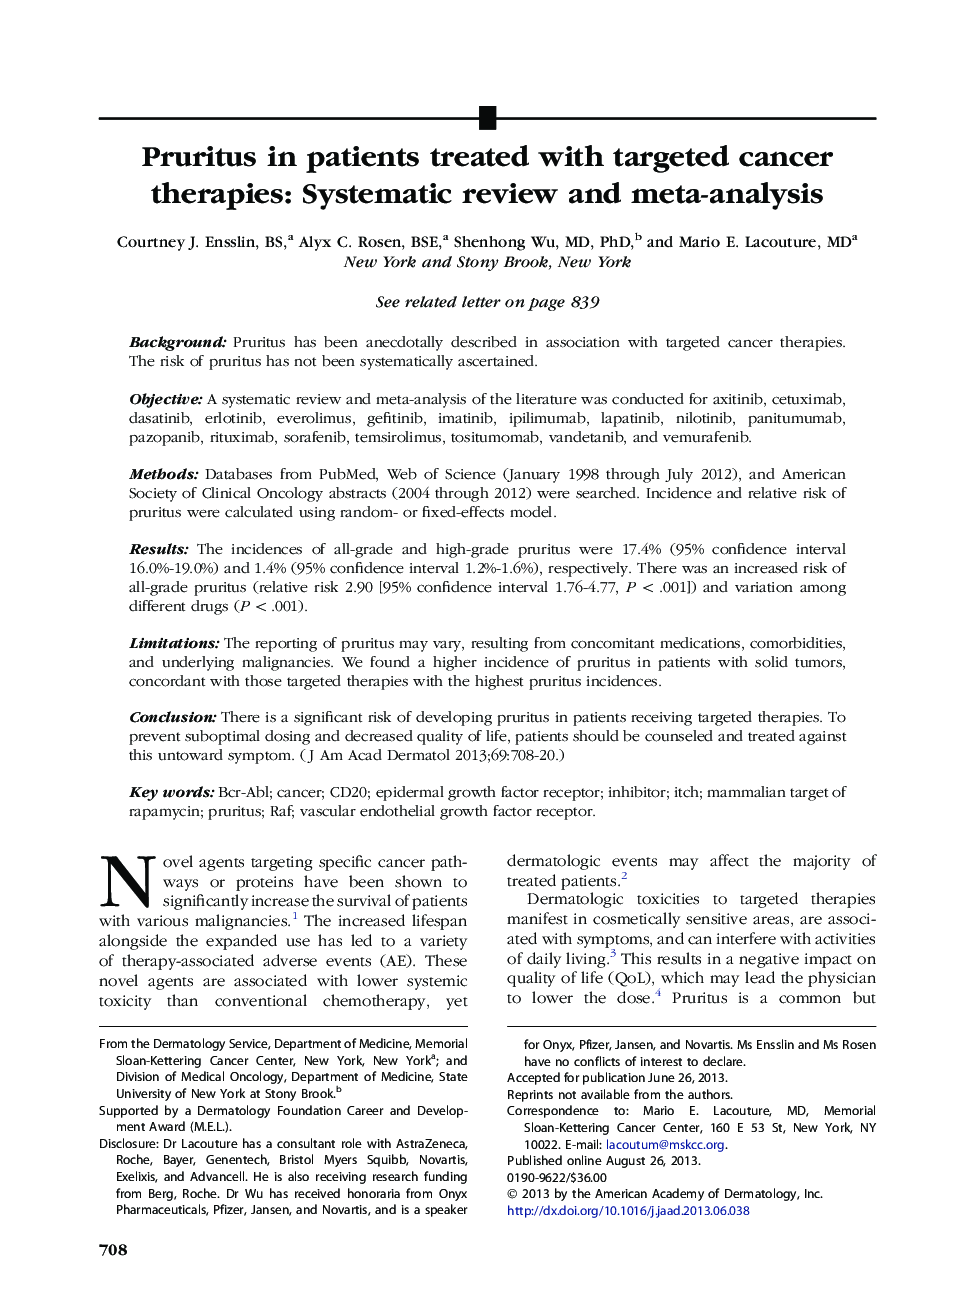 Pruritus in patients treated with targeted cancer therapies: Systematic review and meta-analysis 